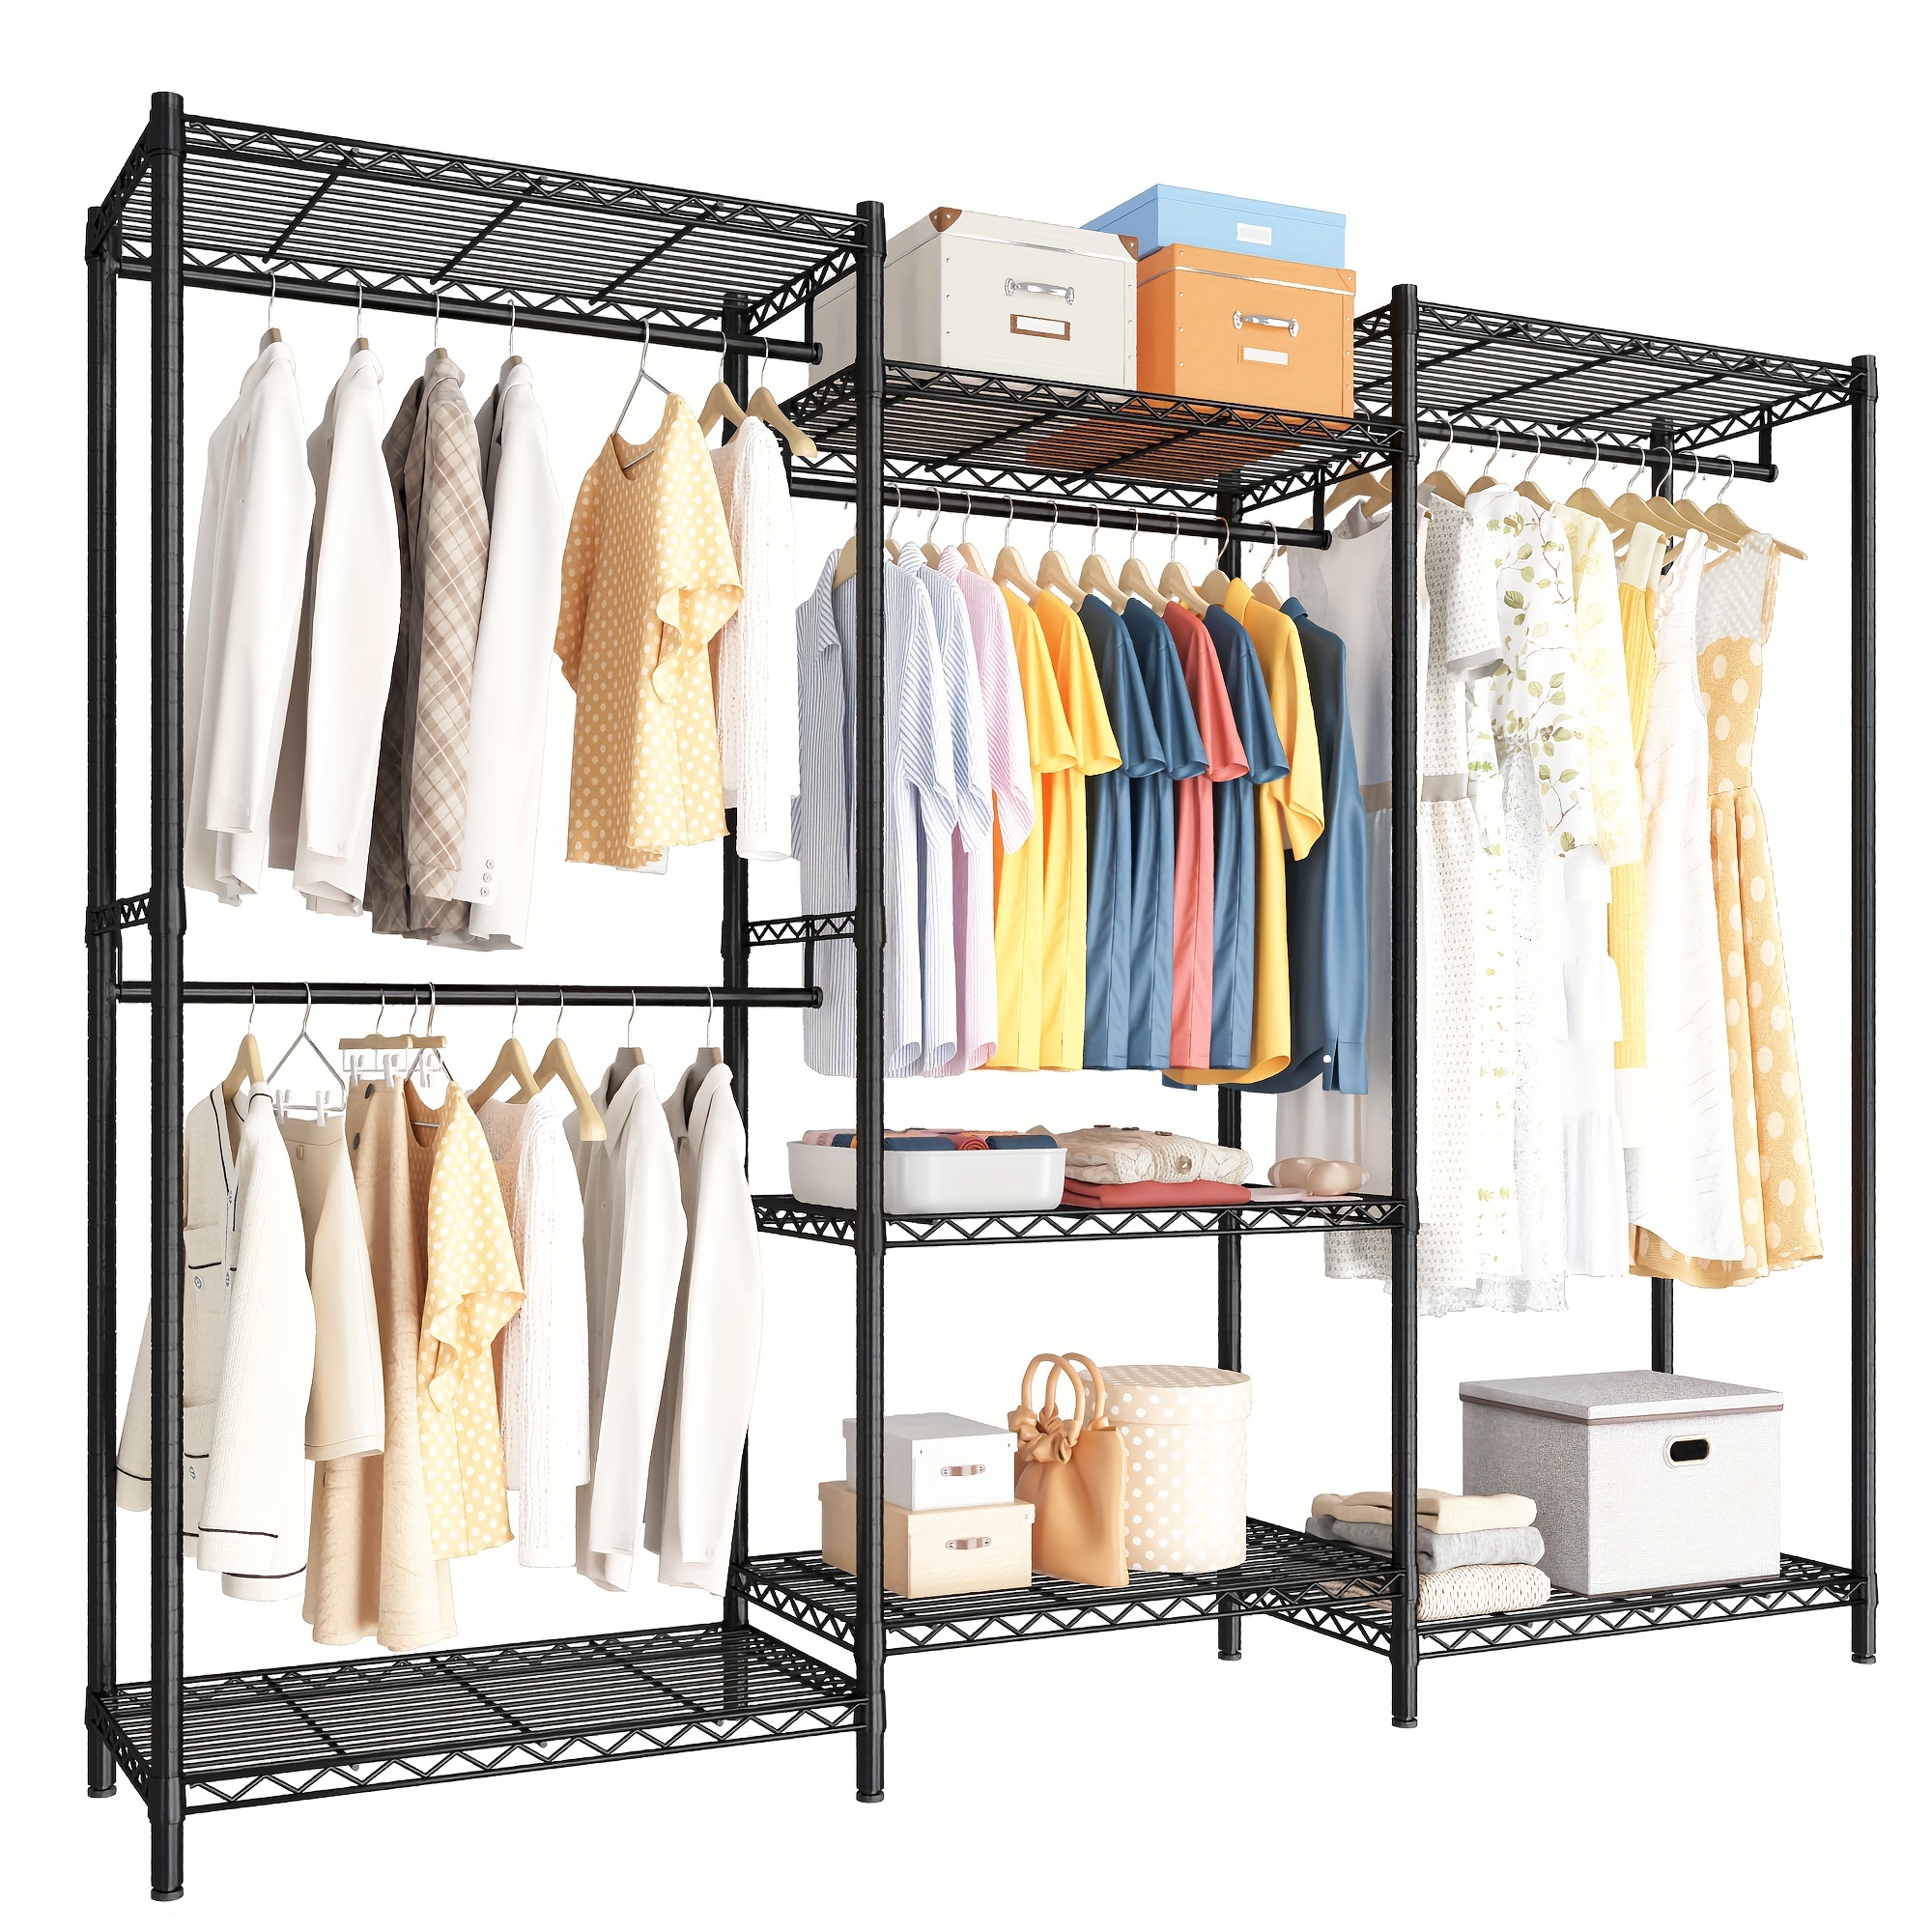 

Clothes Rack Heavy Duty Clothing Rack Load 900lbs Clothing Racks For Hanging Clothes Metal Garment Rack Portable Clothes Rack Heavy Duty Freestanding Closet Wardrobe 77.1" H X69.1" W X16.1" D, Black